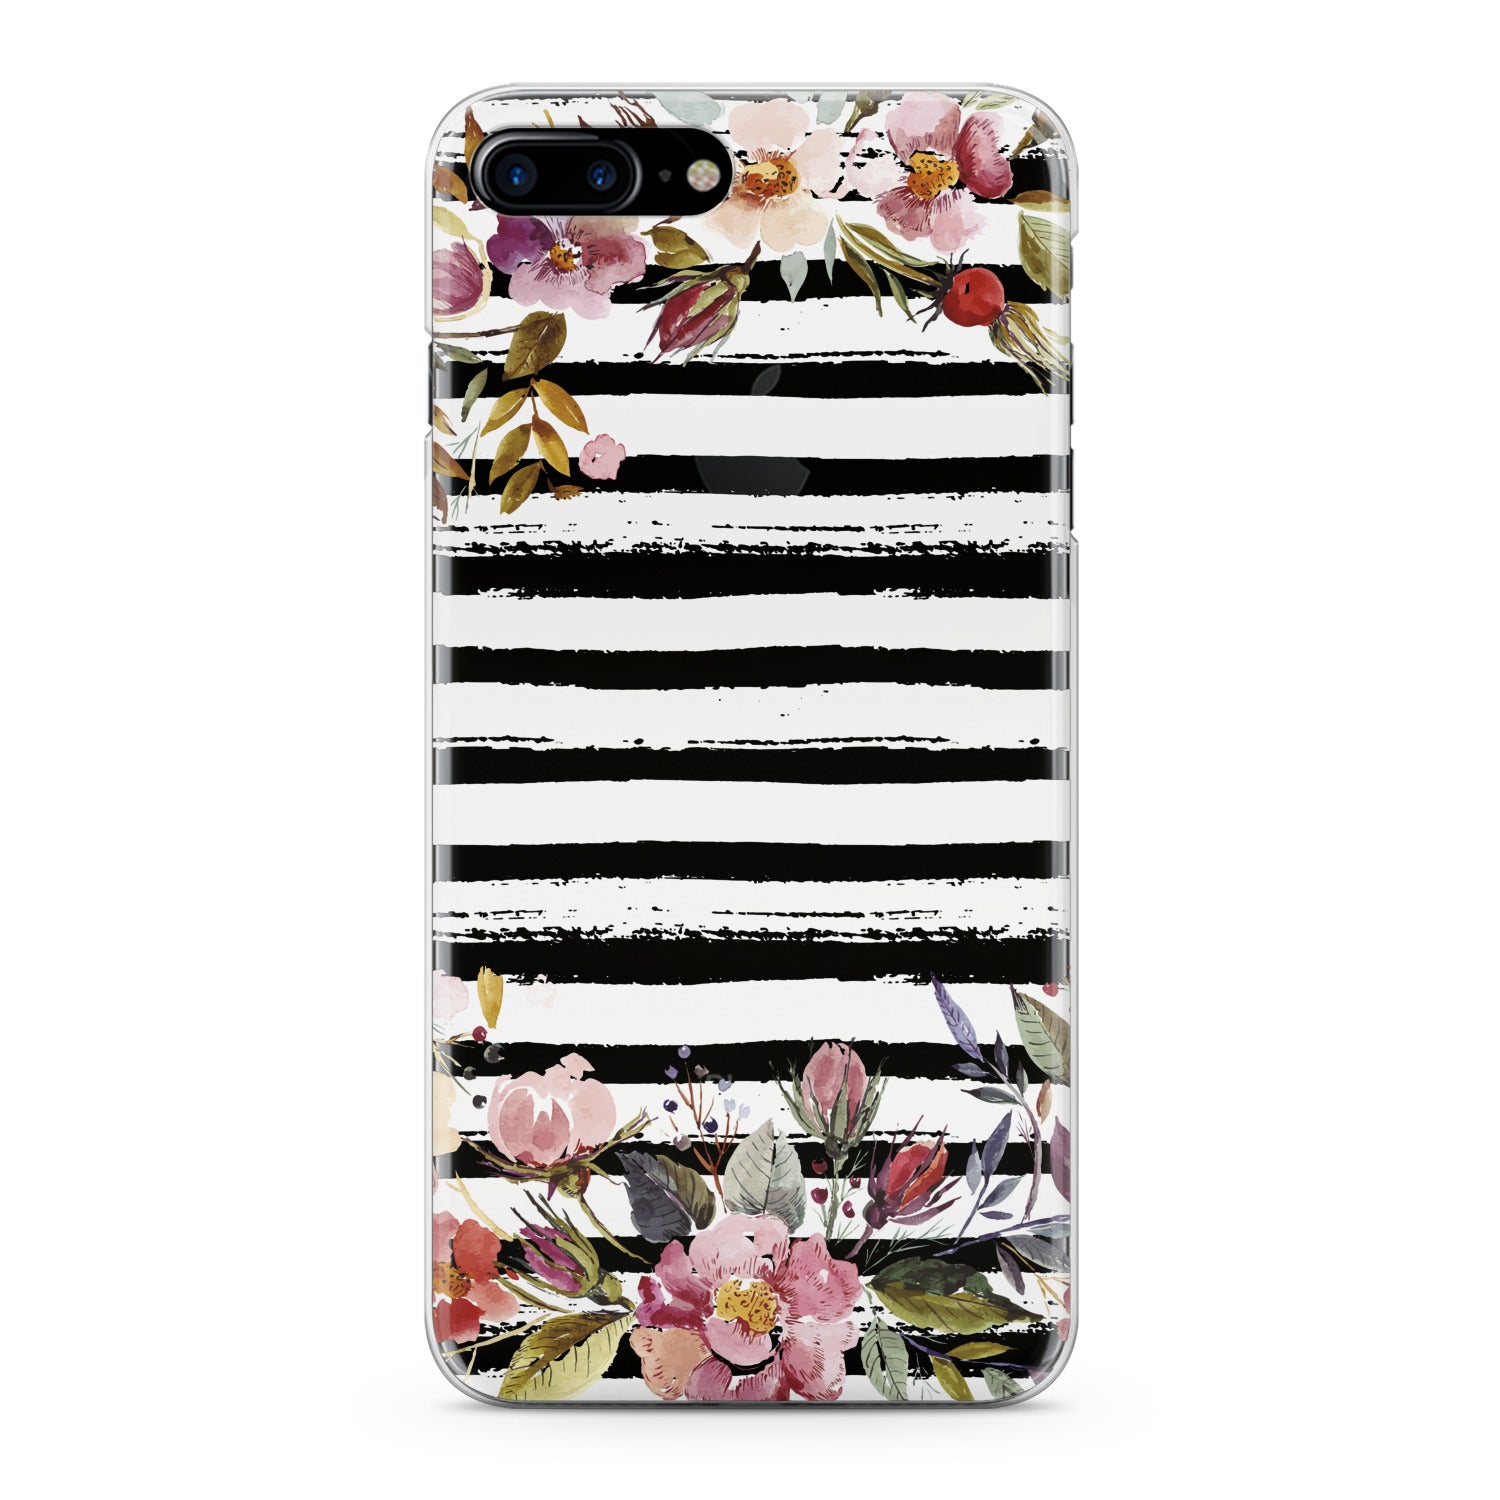 Lex Altern Watercolor Spring Flowers Phone Case for your iPhone & Android phone.